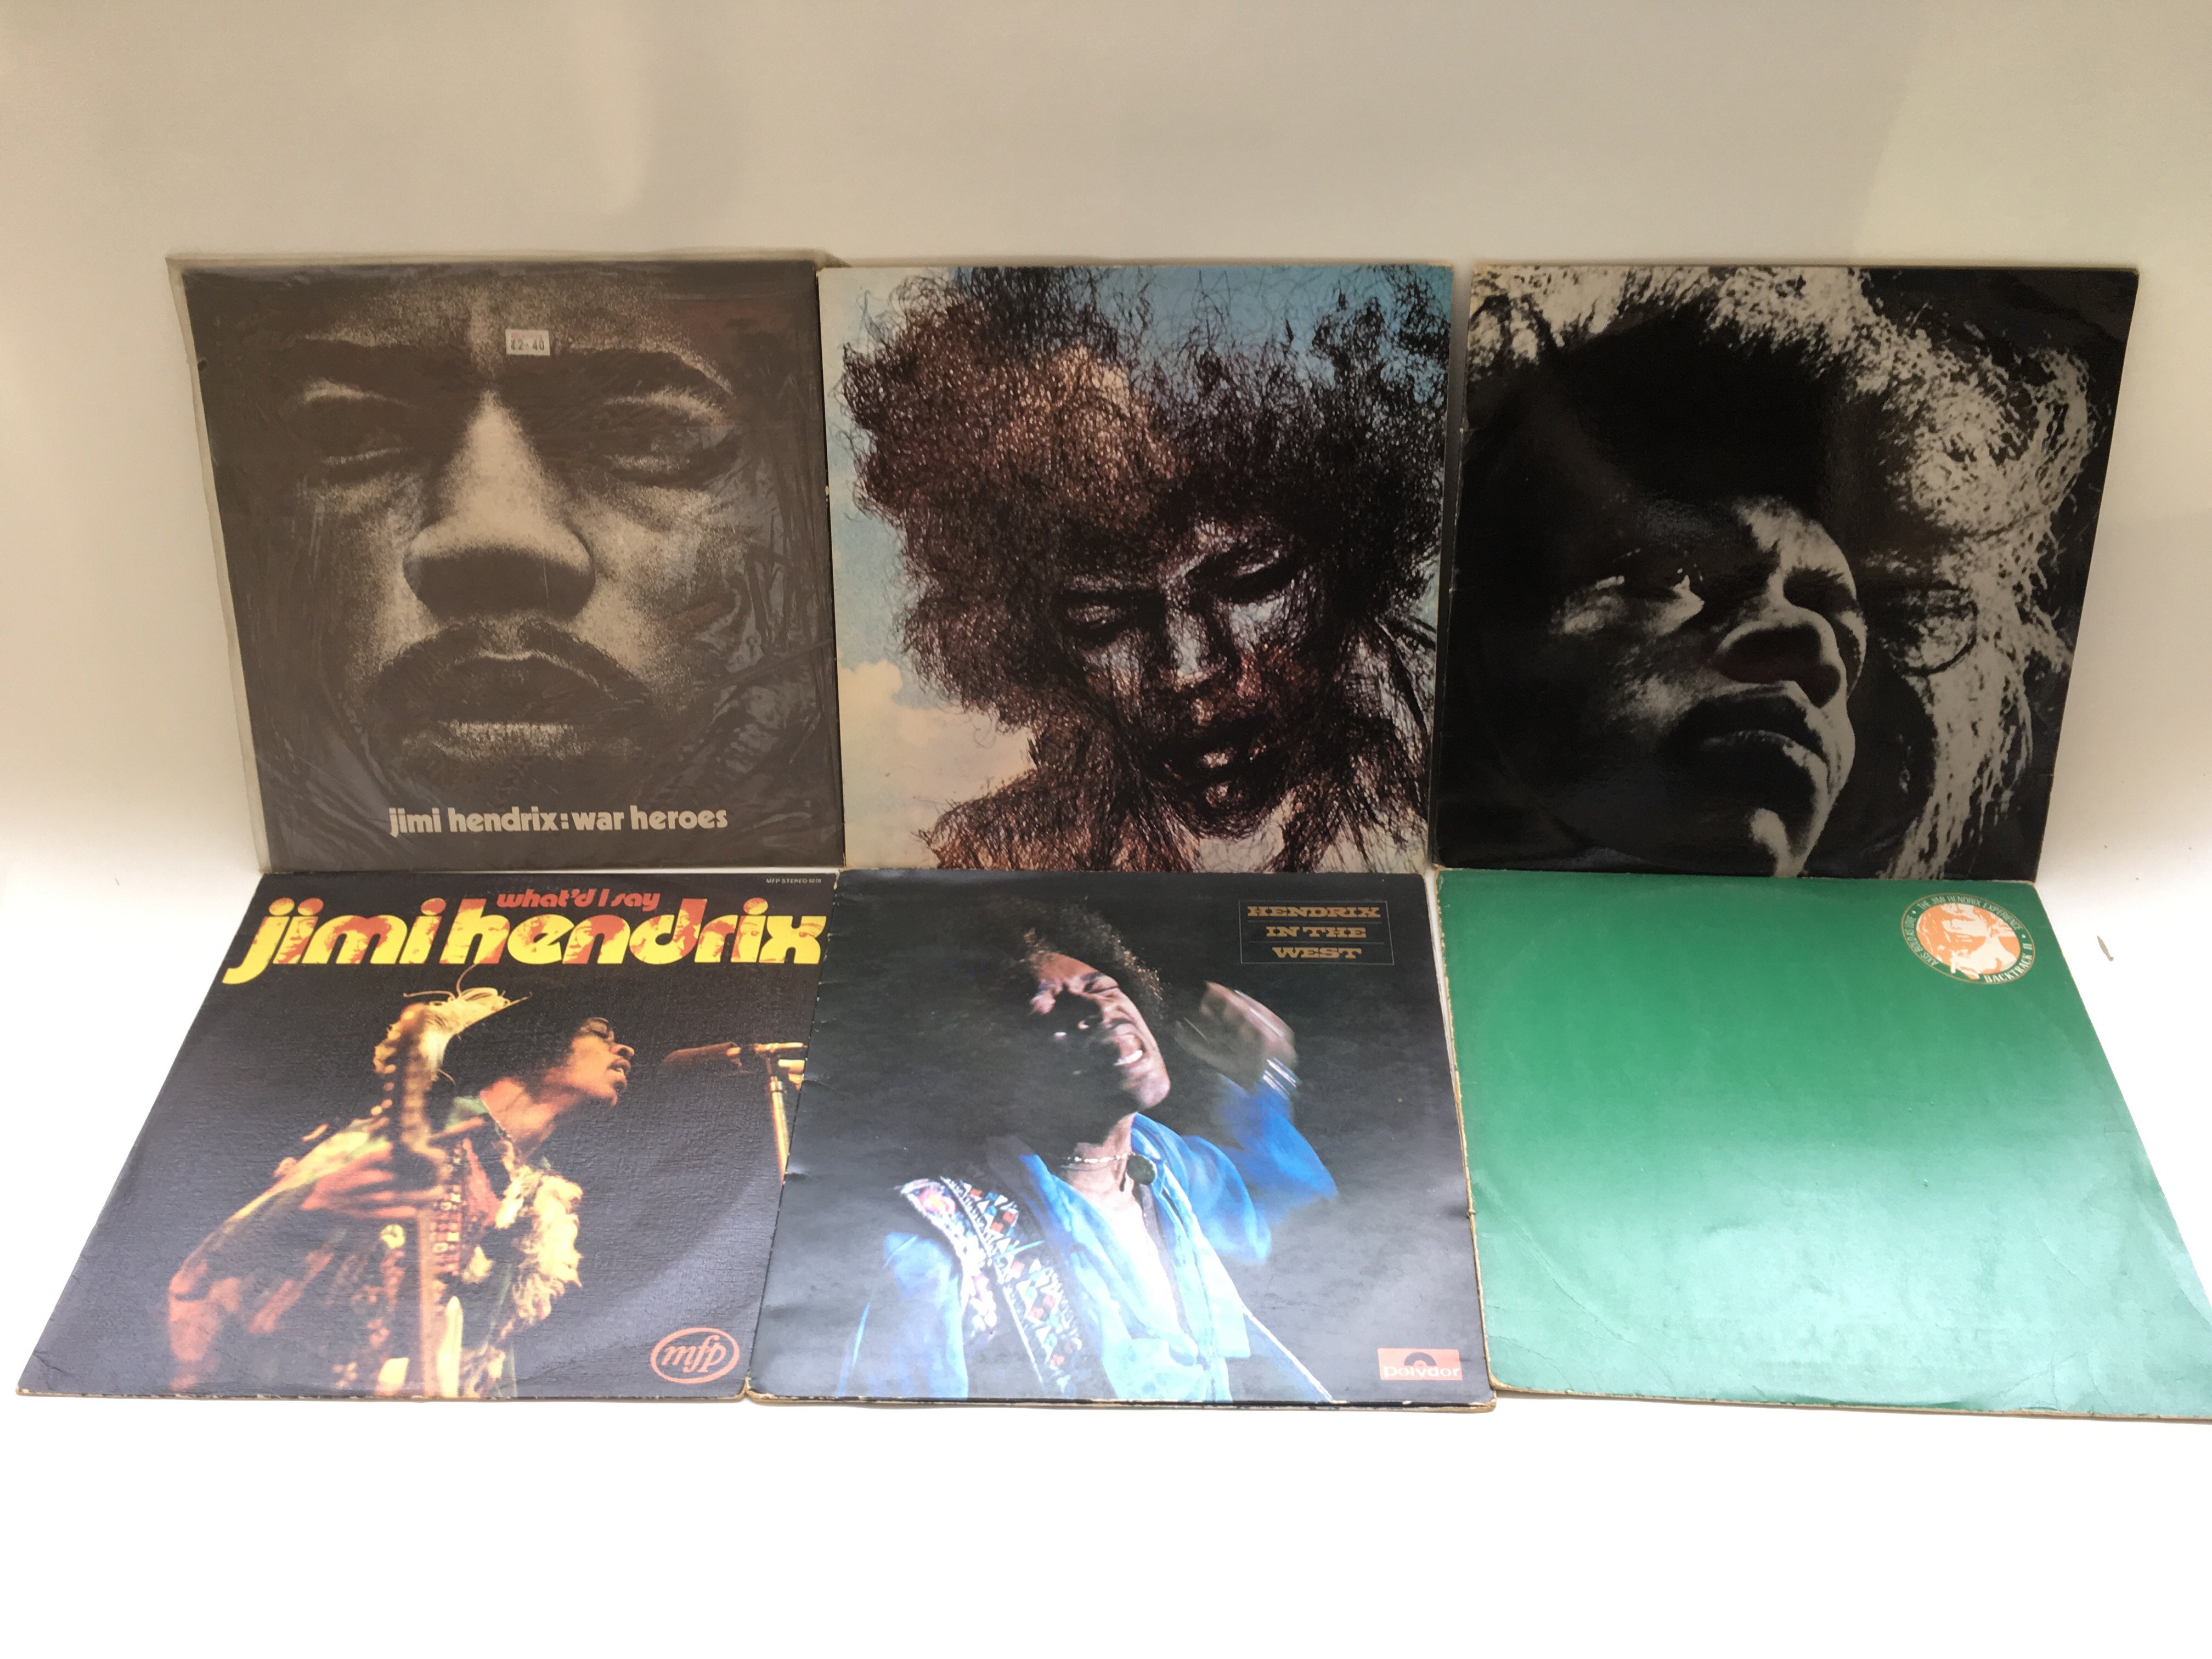 A collection of various Jimi Hendrix LPs including